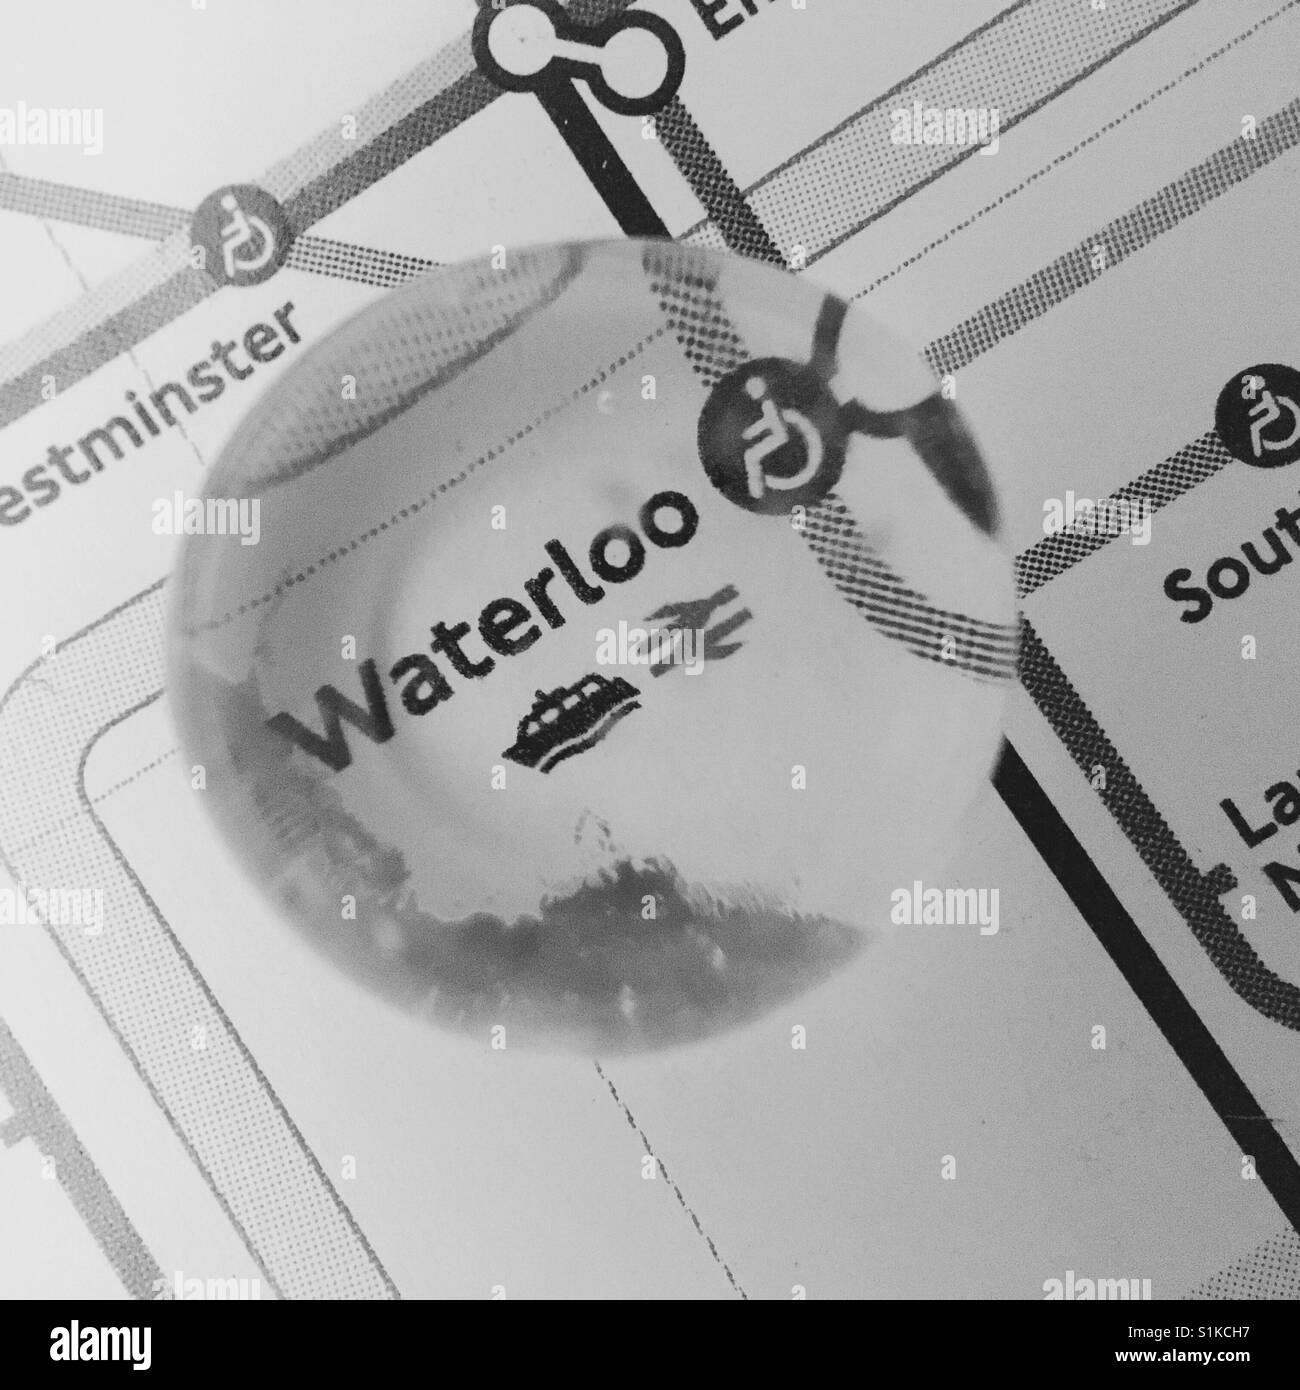 B&W closeup photo of London Underground map with glass bubble over Waterloo station Stock Photo